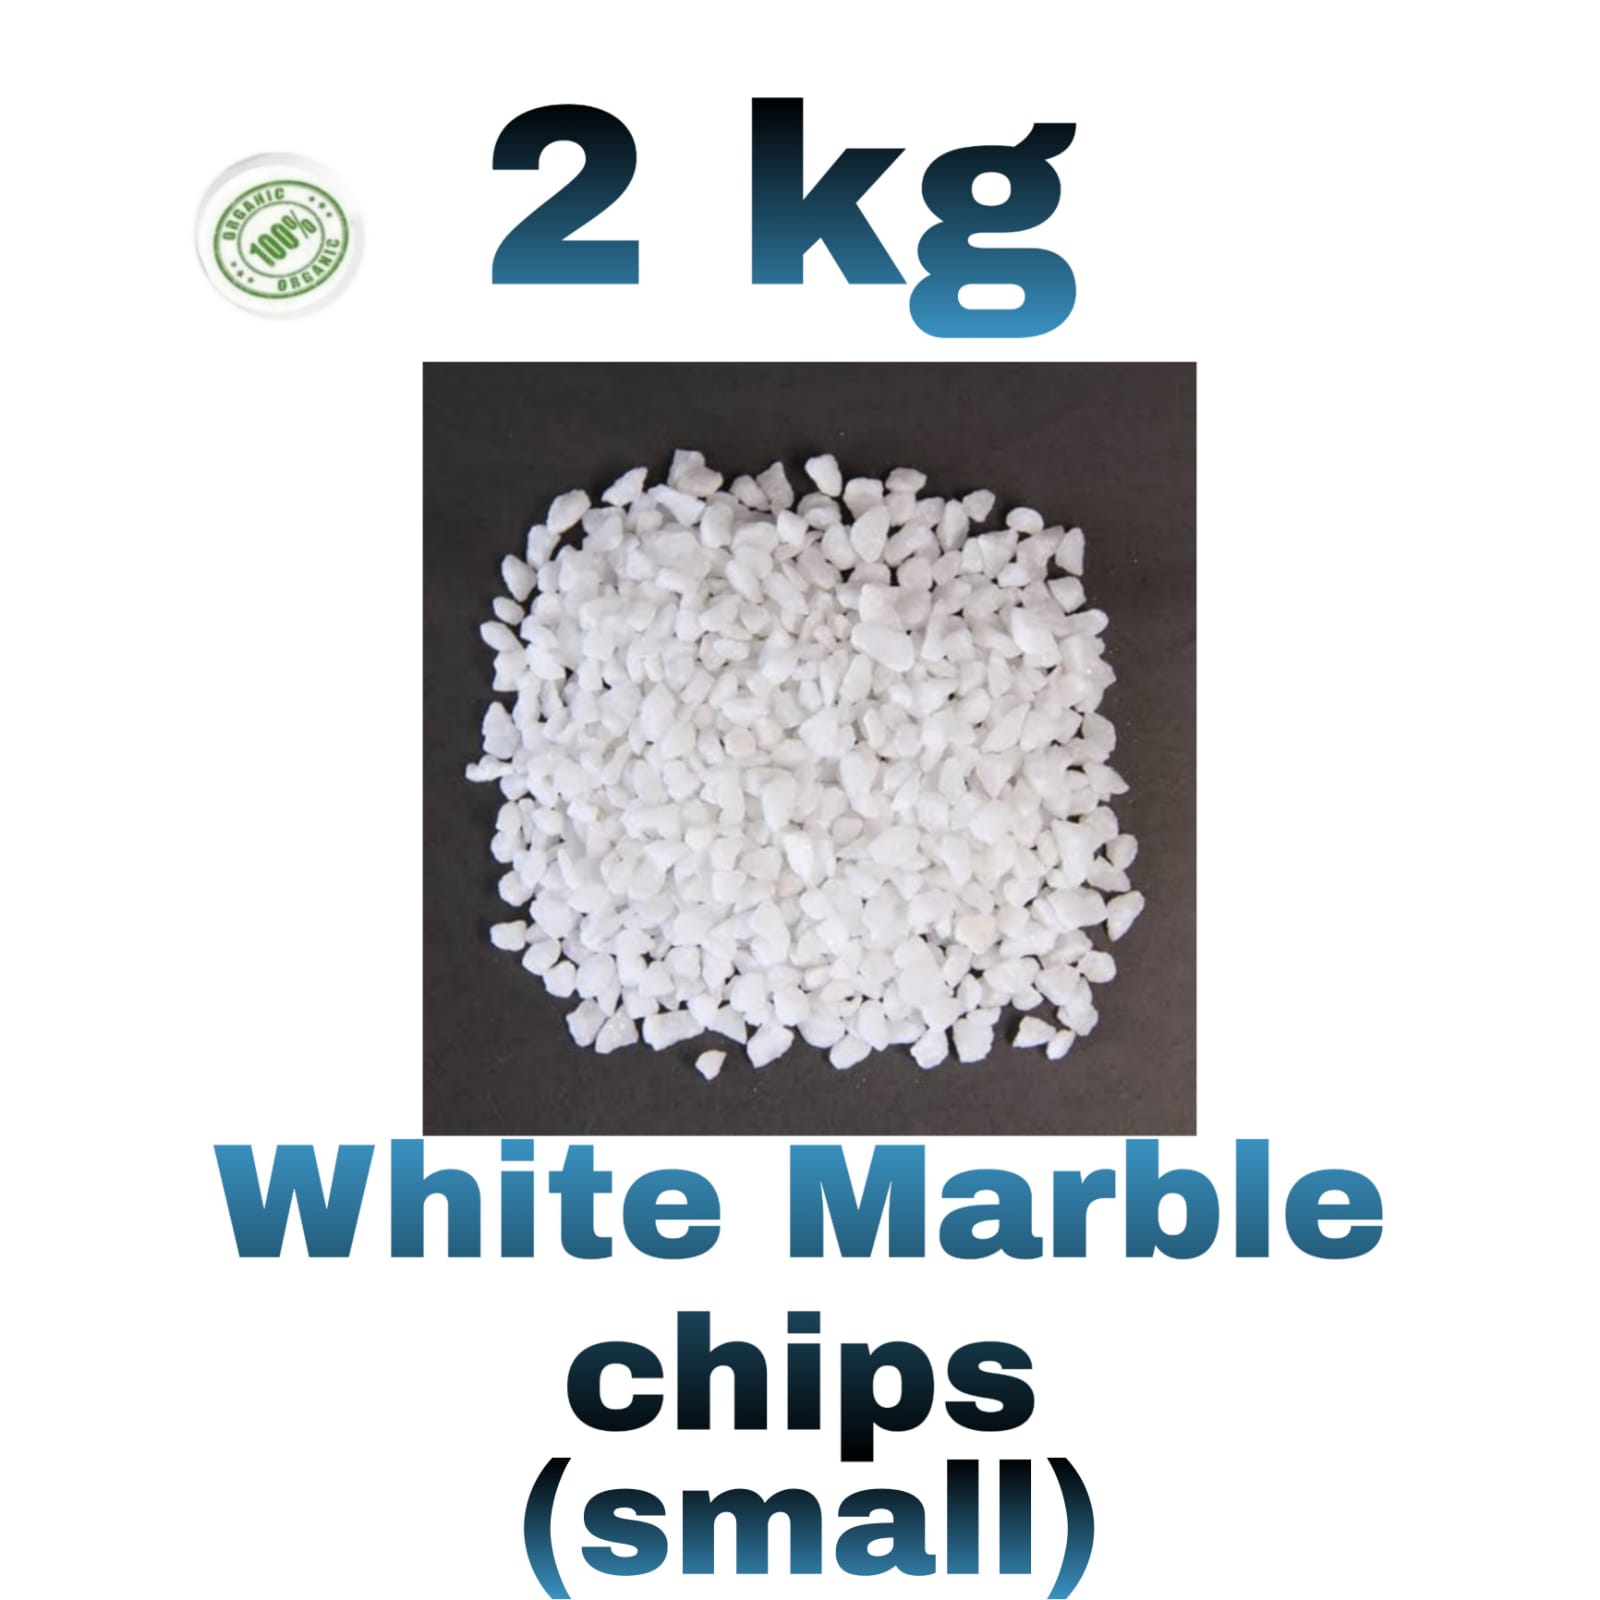 WHITE MARBLE CHIPS (SMALL) 2KG